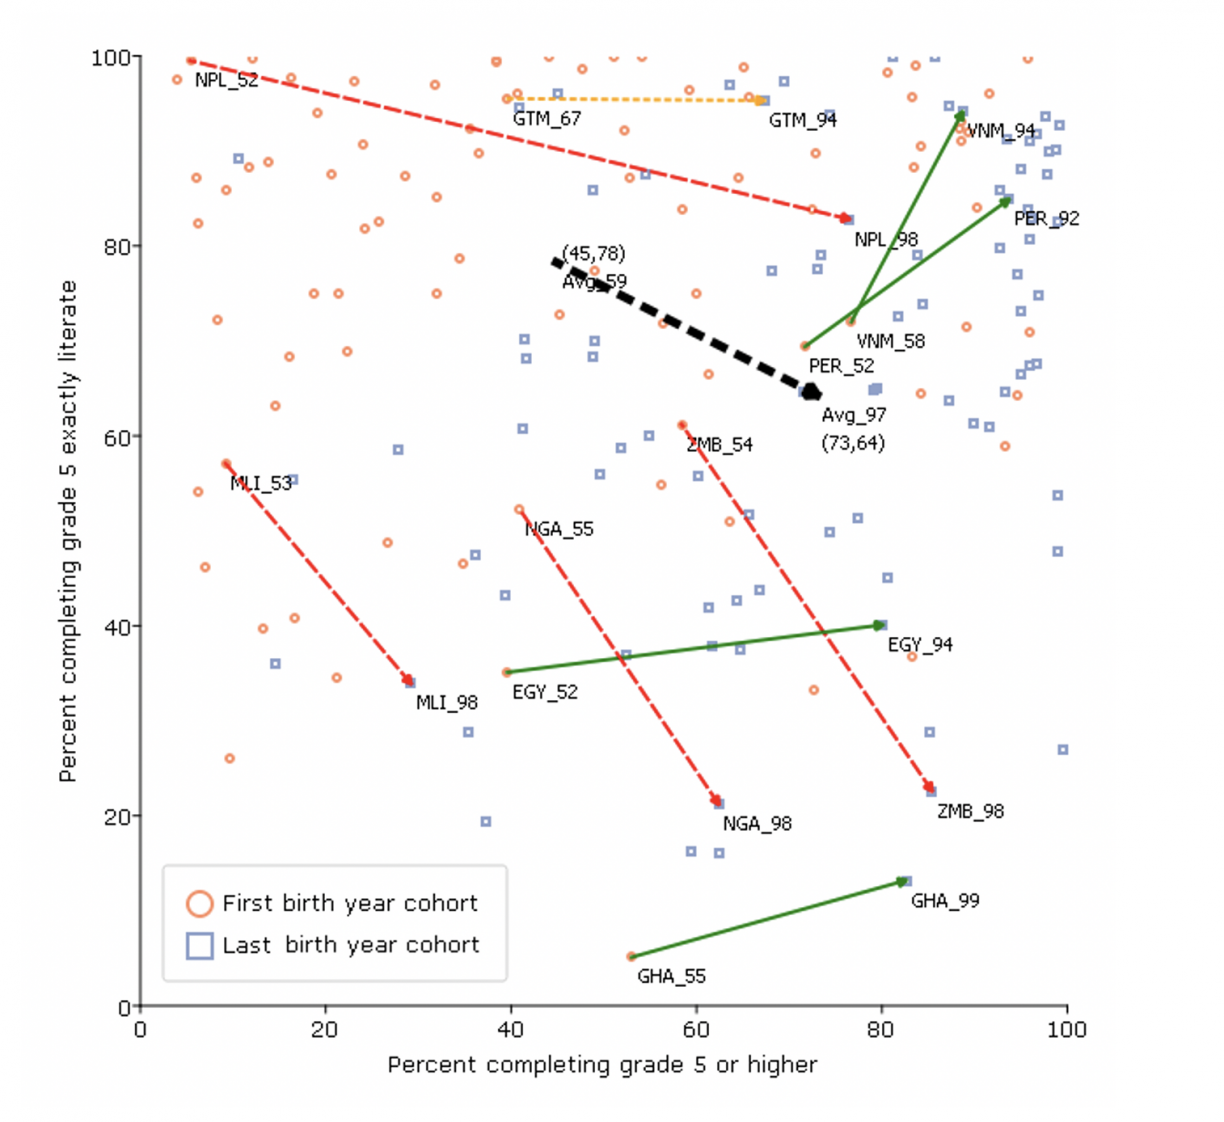 Scatter graph with "percent completing Grade 5 or higher" on the x axis and "percent completing Grade 5 exactly literate" on the y axis. Some countries improved both enrolment and literacy, but many lost literacy when enrolment improved